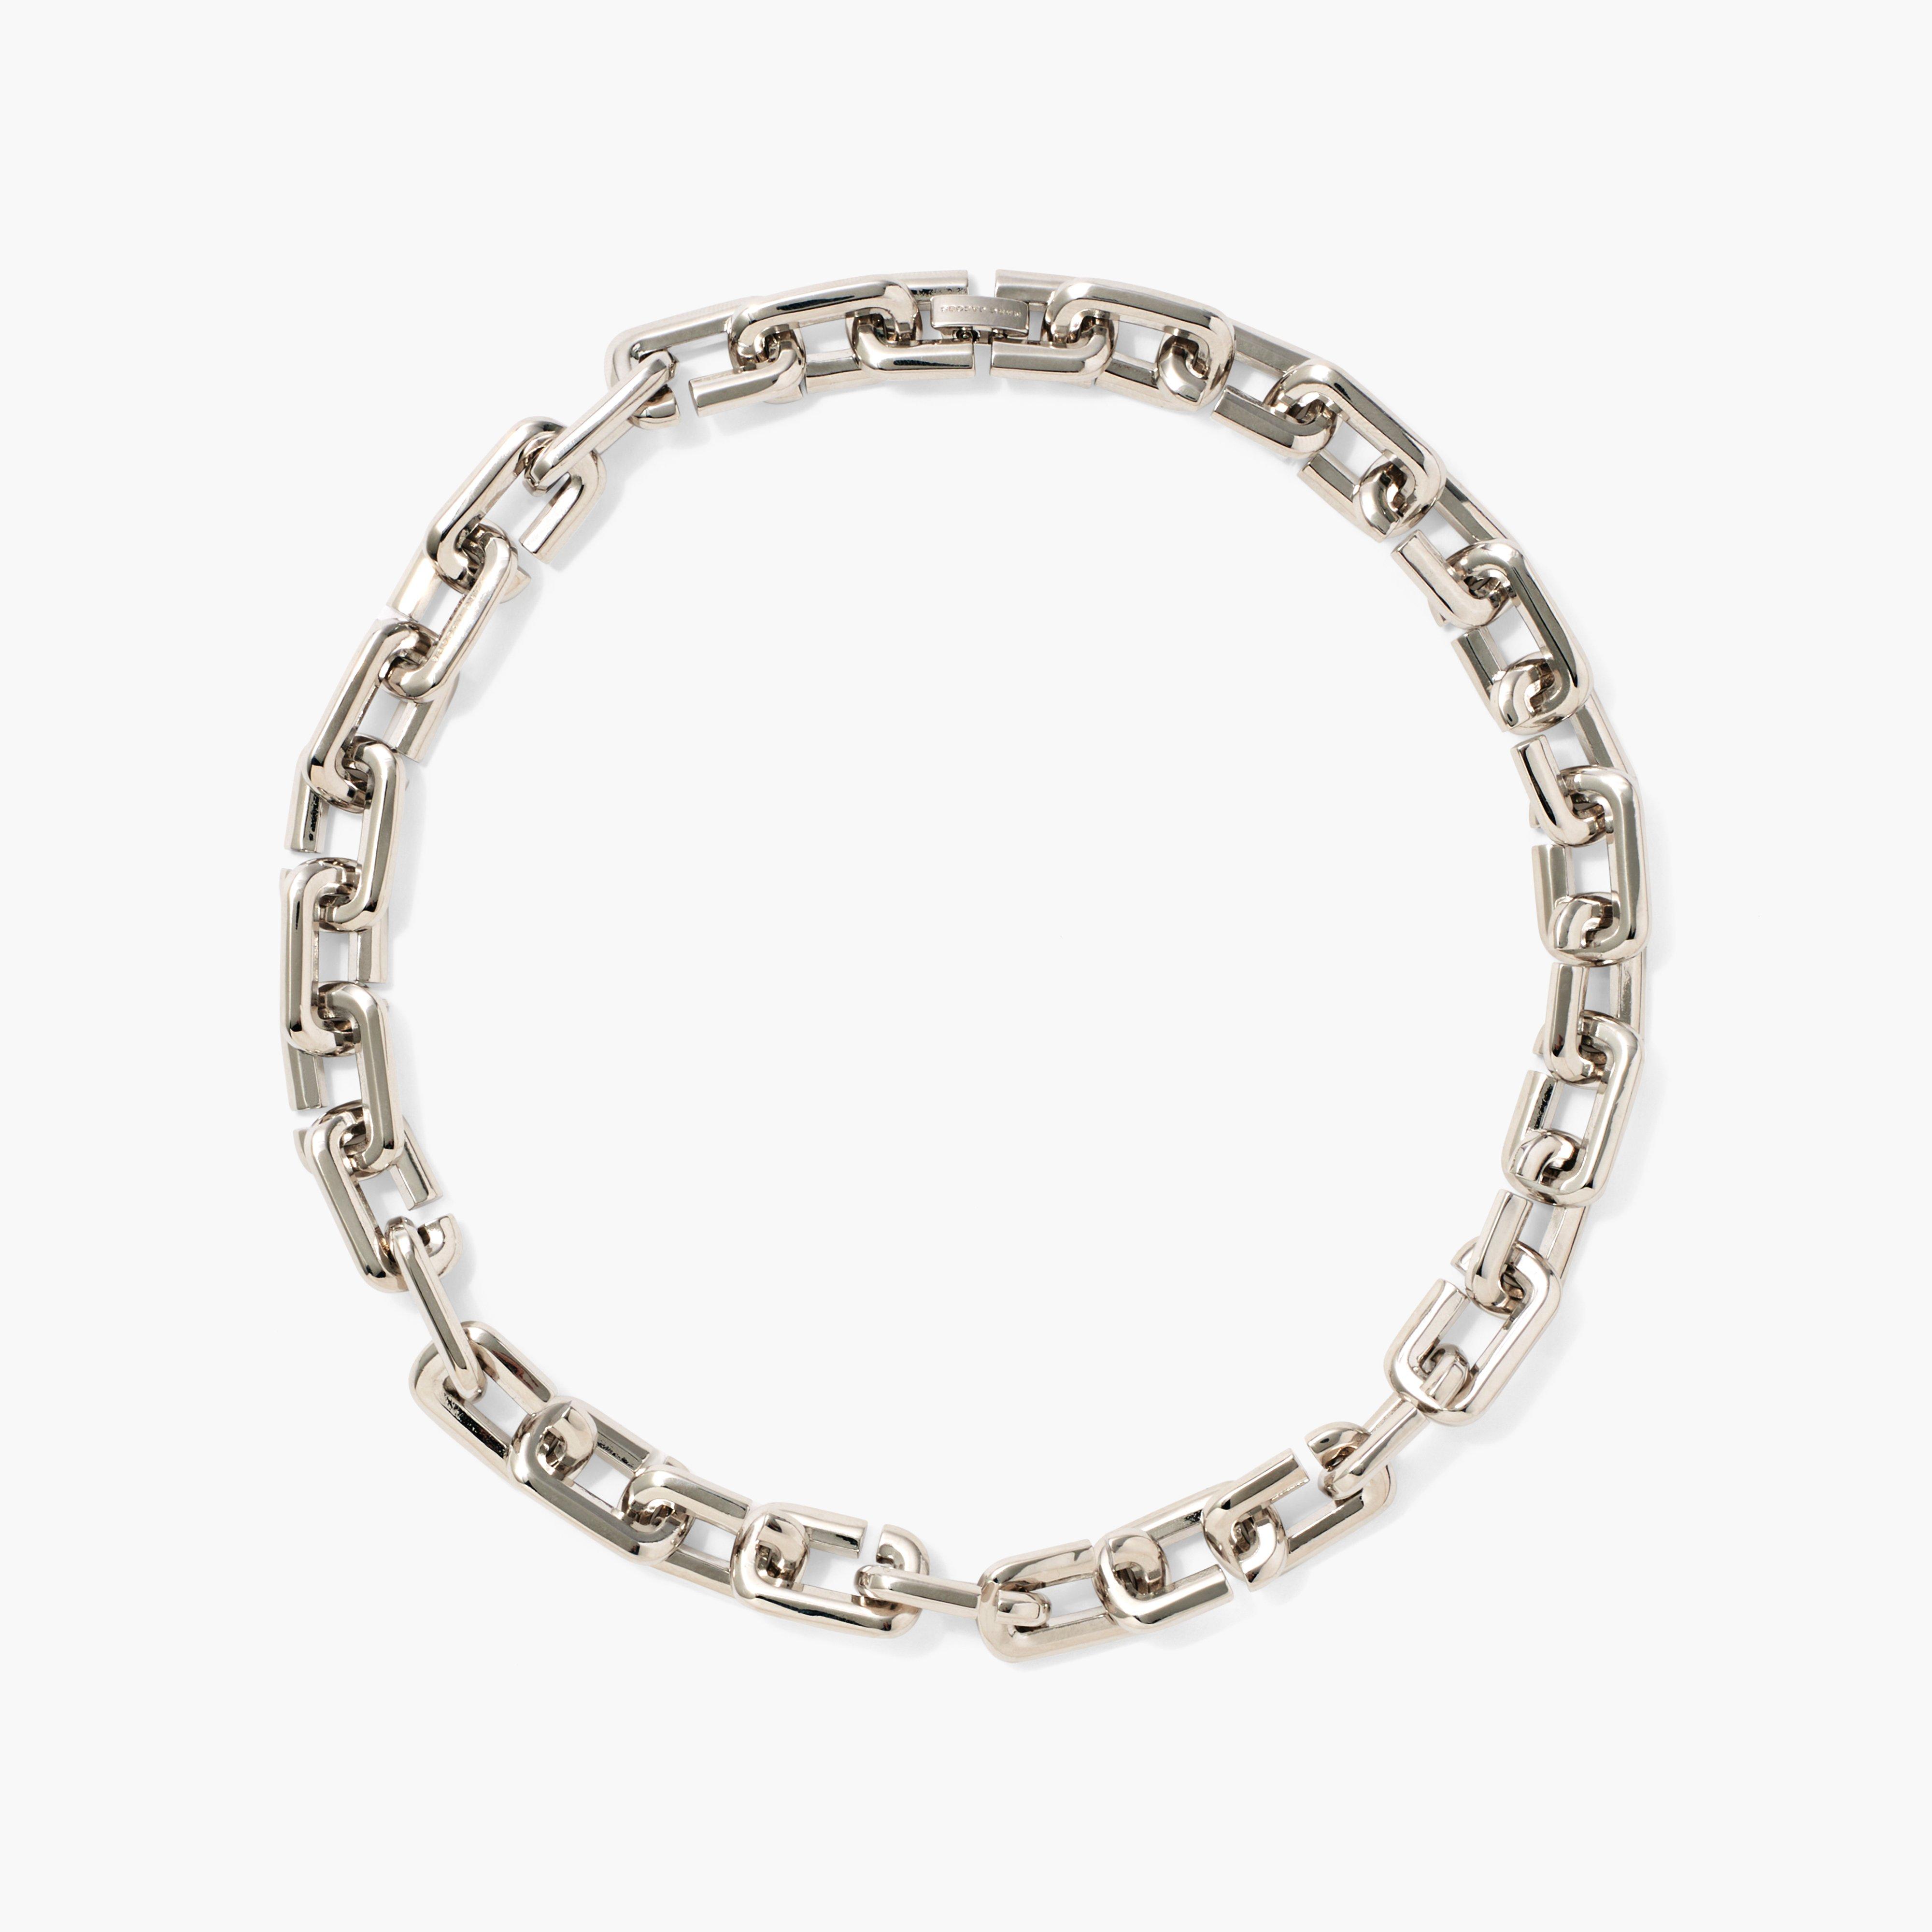 Marc by Marc jacobs The J Marc Chain Link Necklace,SILVER